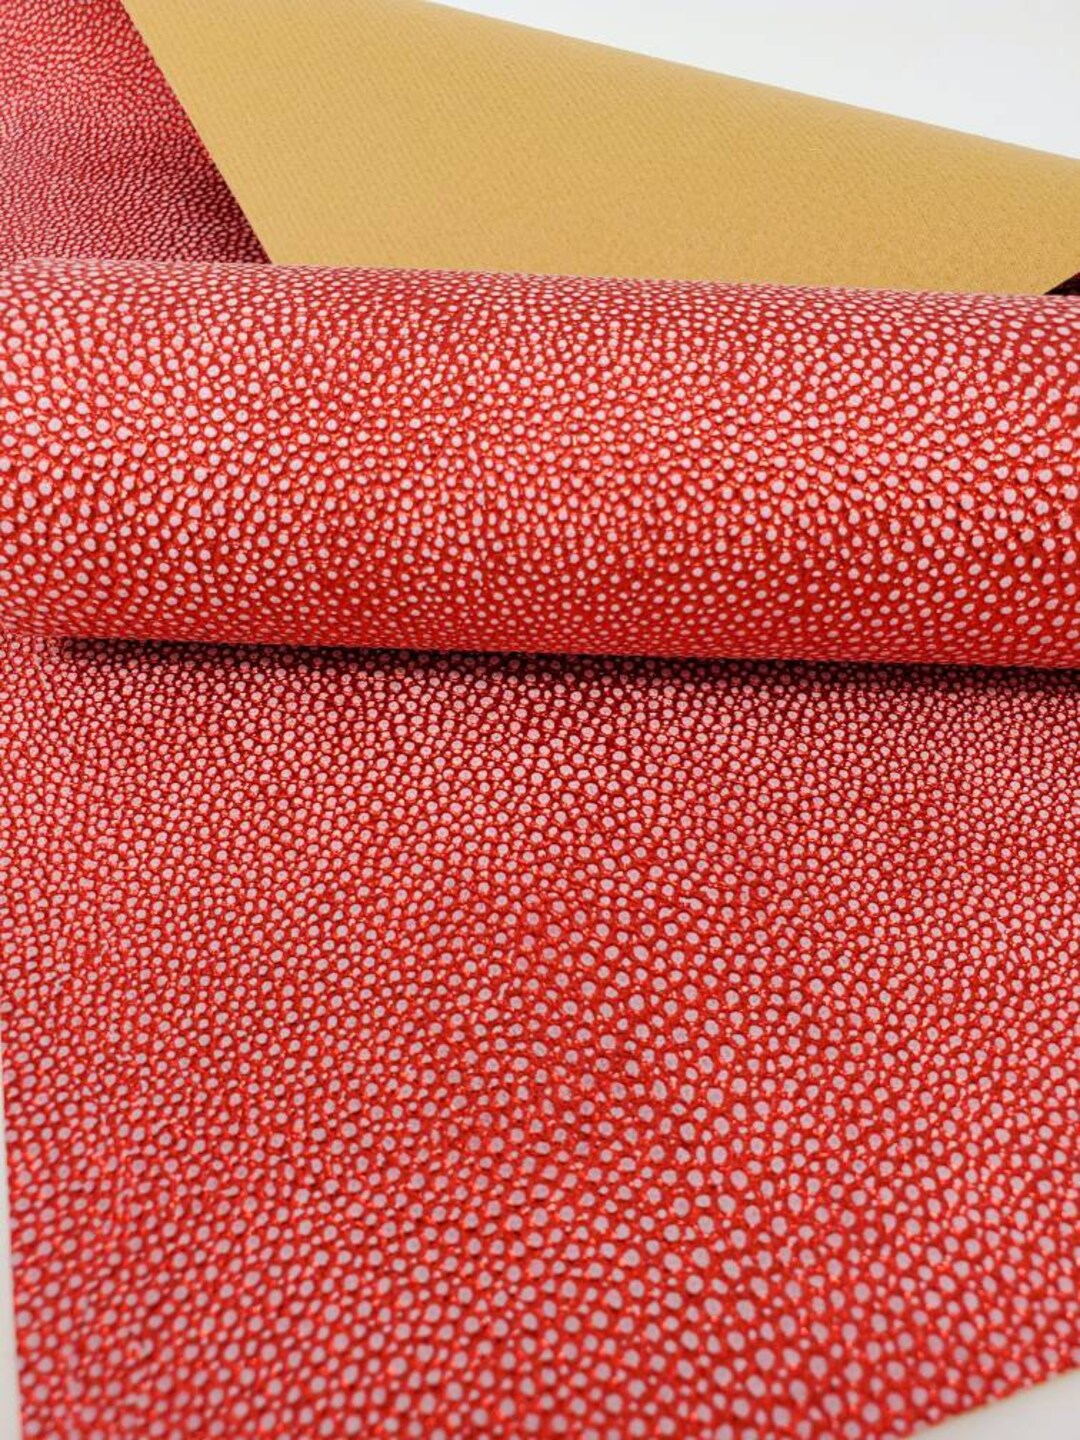 F6680 Texture Faux Leather Sheets. Texture Leather Sheet. 